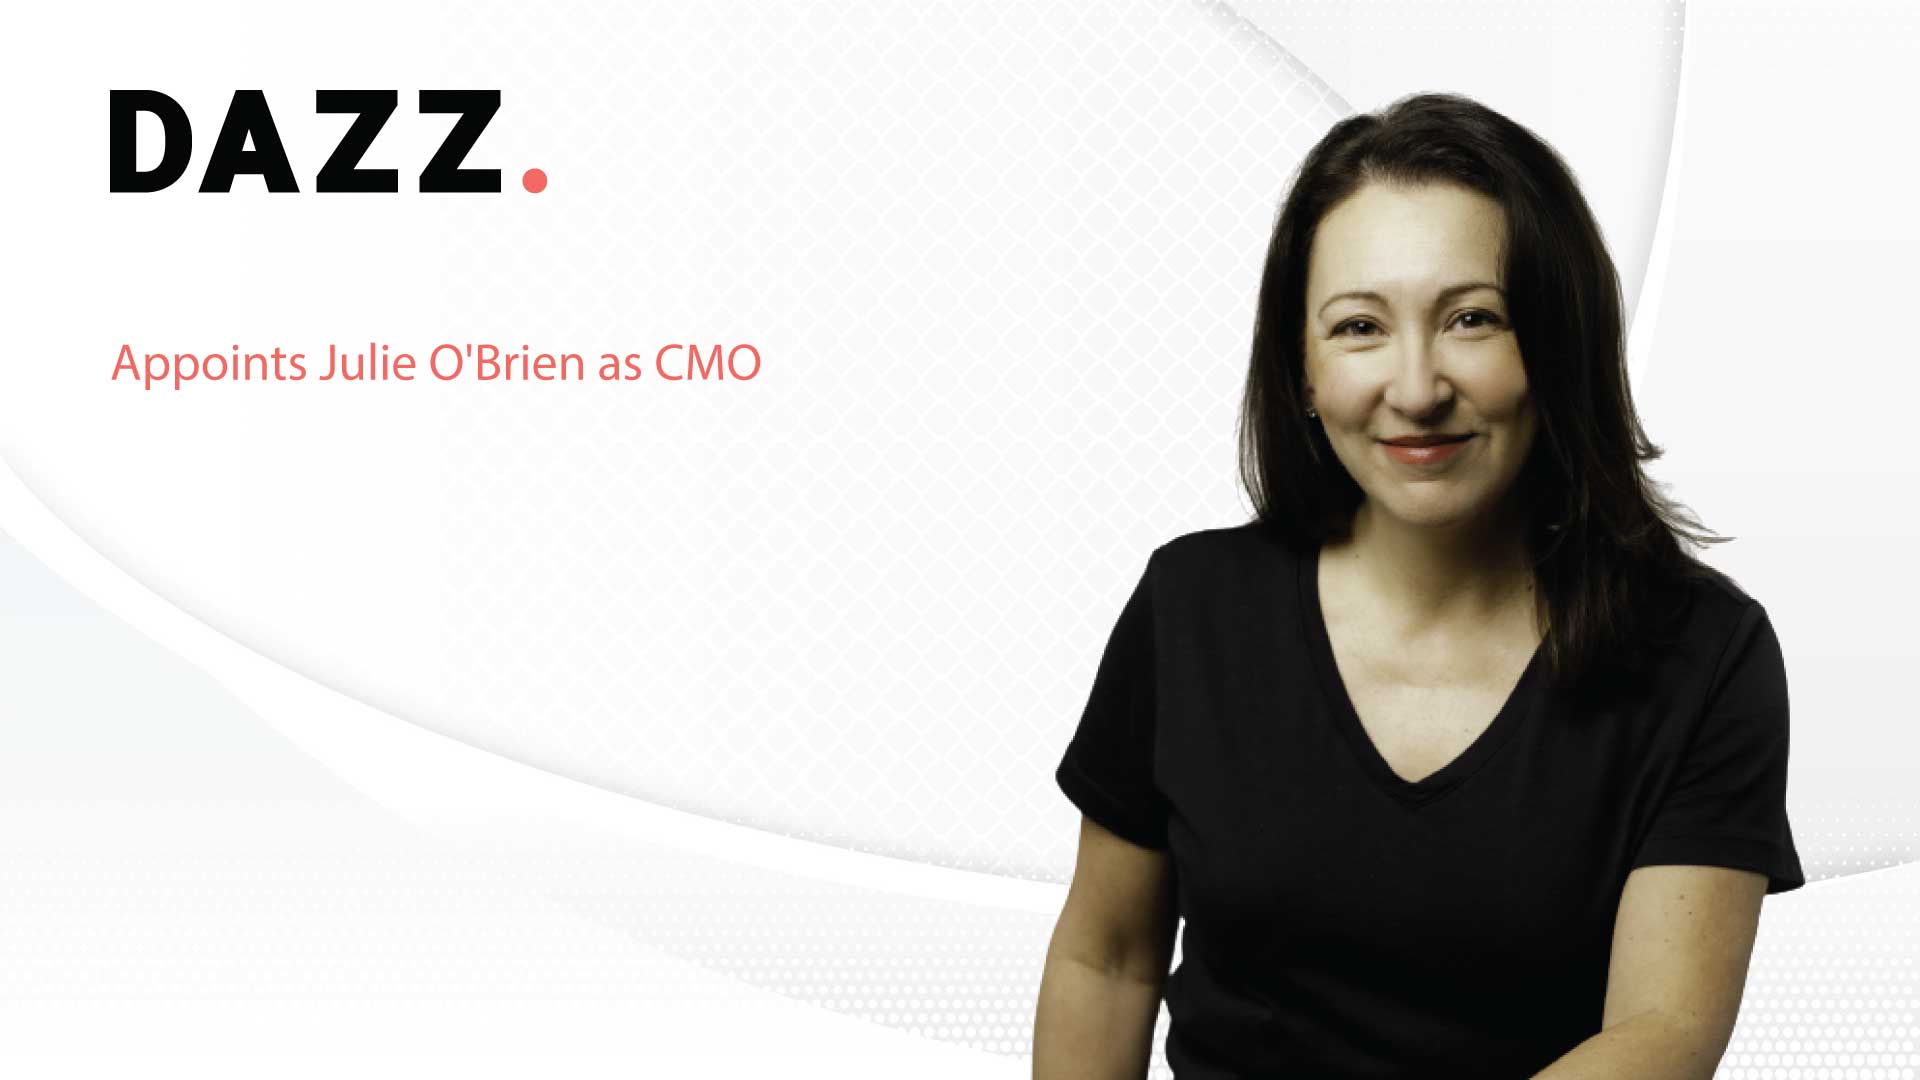 Cybersecurity Startup Dazz Appoints Julie O'Brien as Chief Marketing Officer